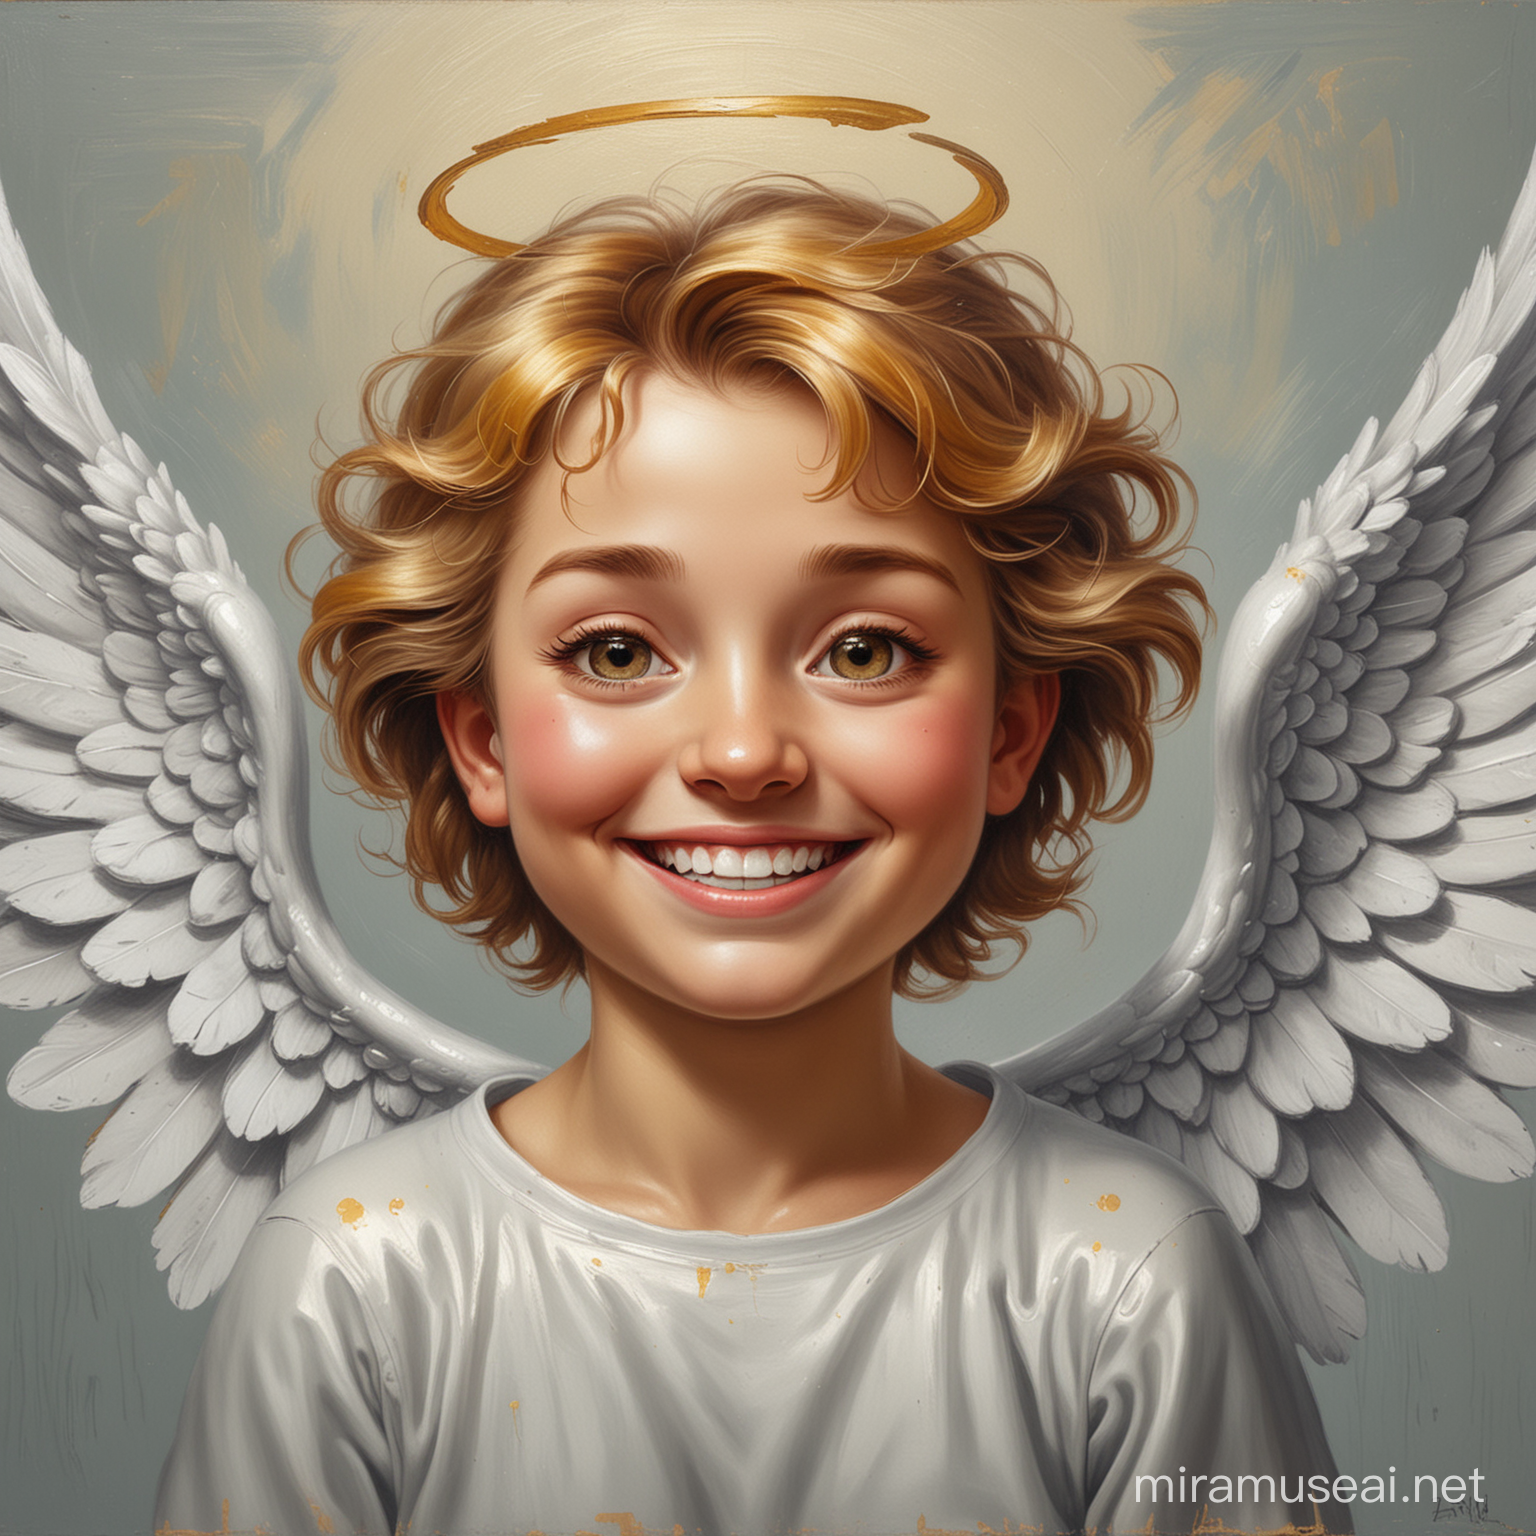 Oil painting Angel but with a Head of a metallic smiling Emoji, michael angelo painting style